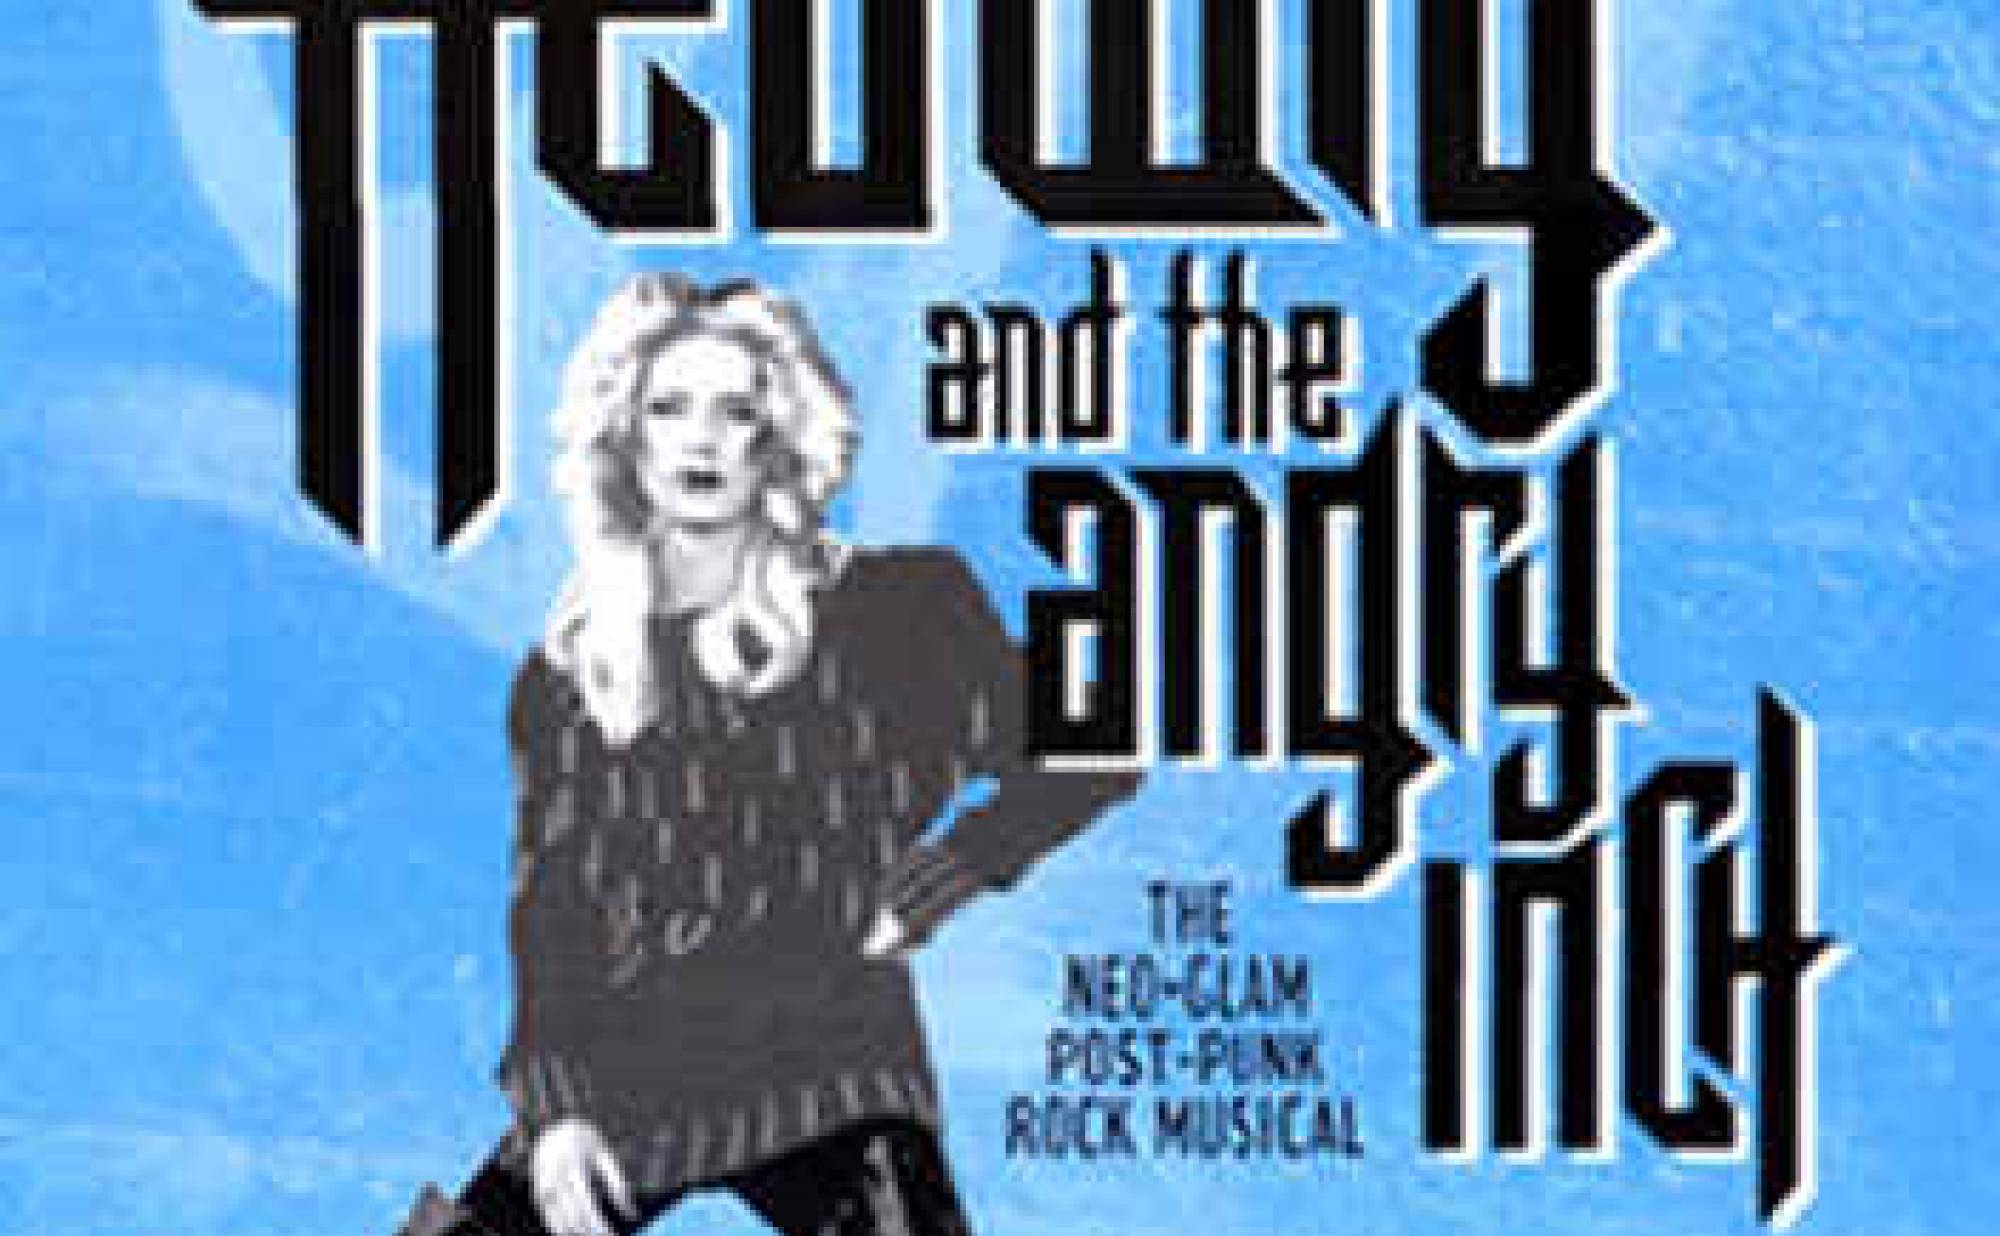 Hedwig the Musical